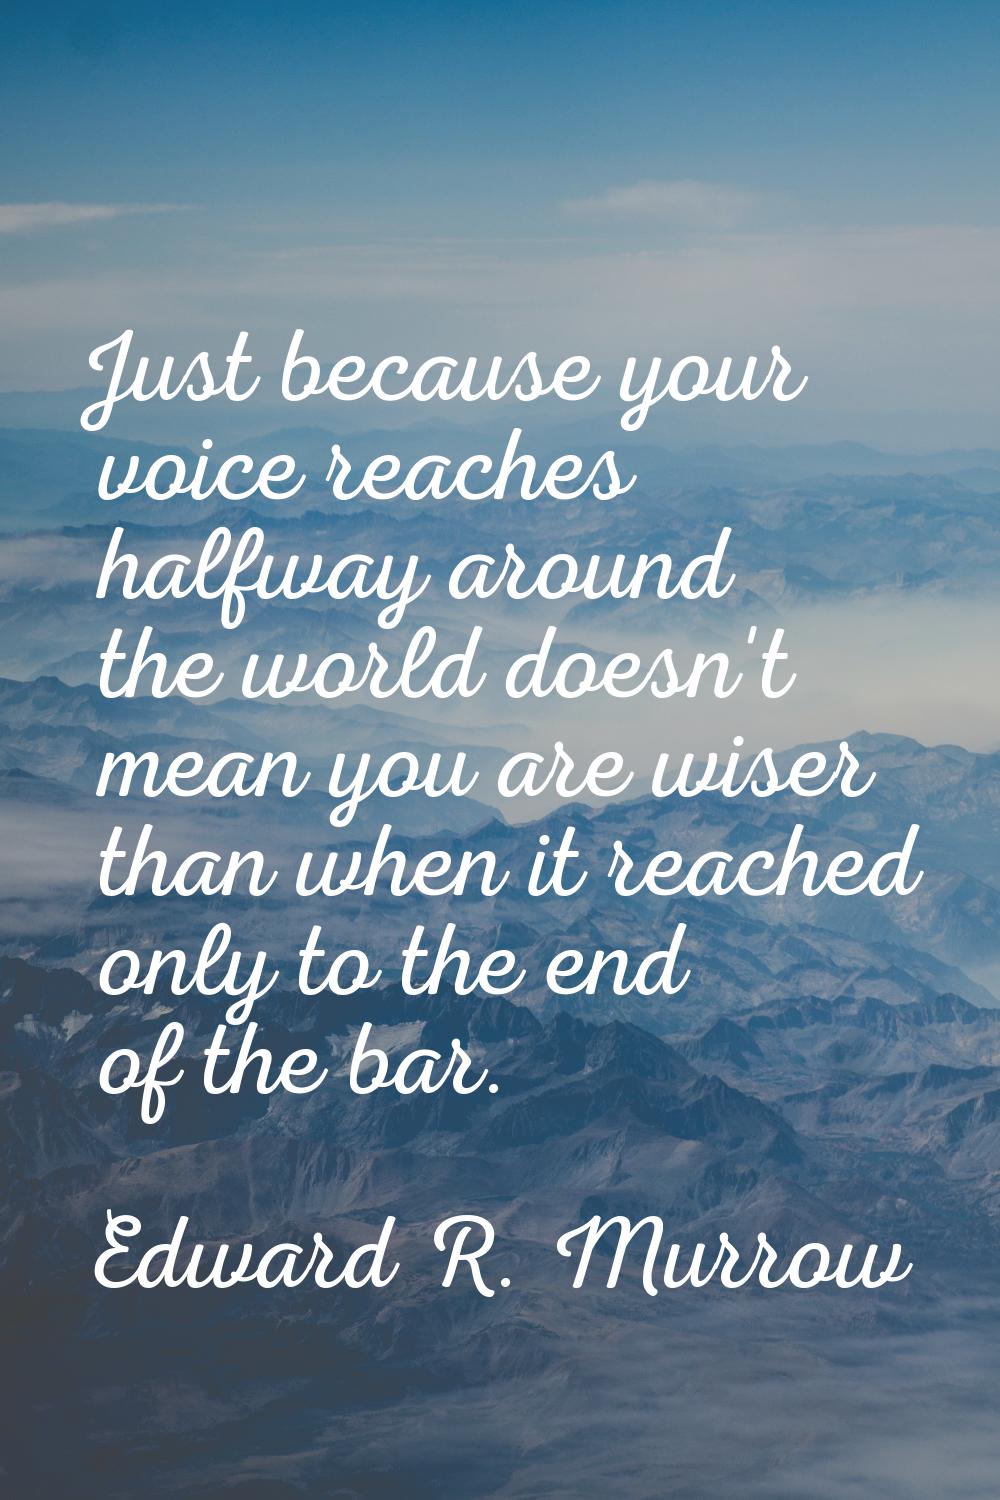 Just because your voice reaches halfway around the world doesn't mean you are wiser than when it re